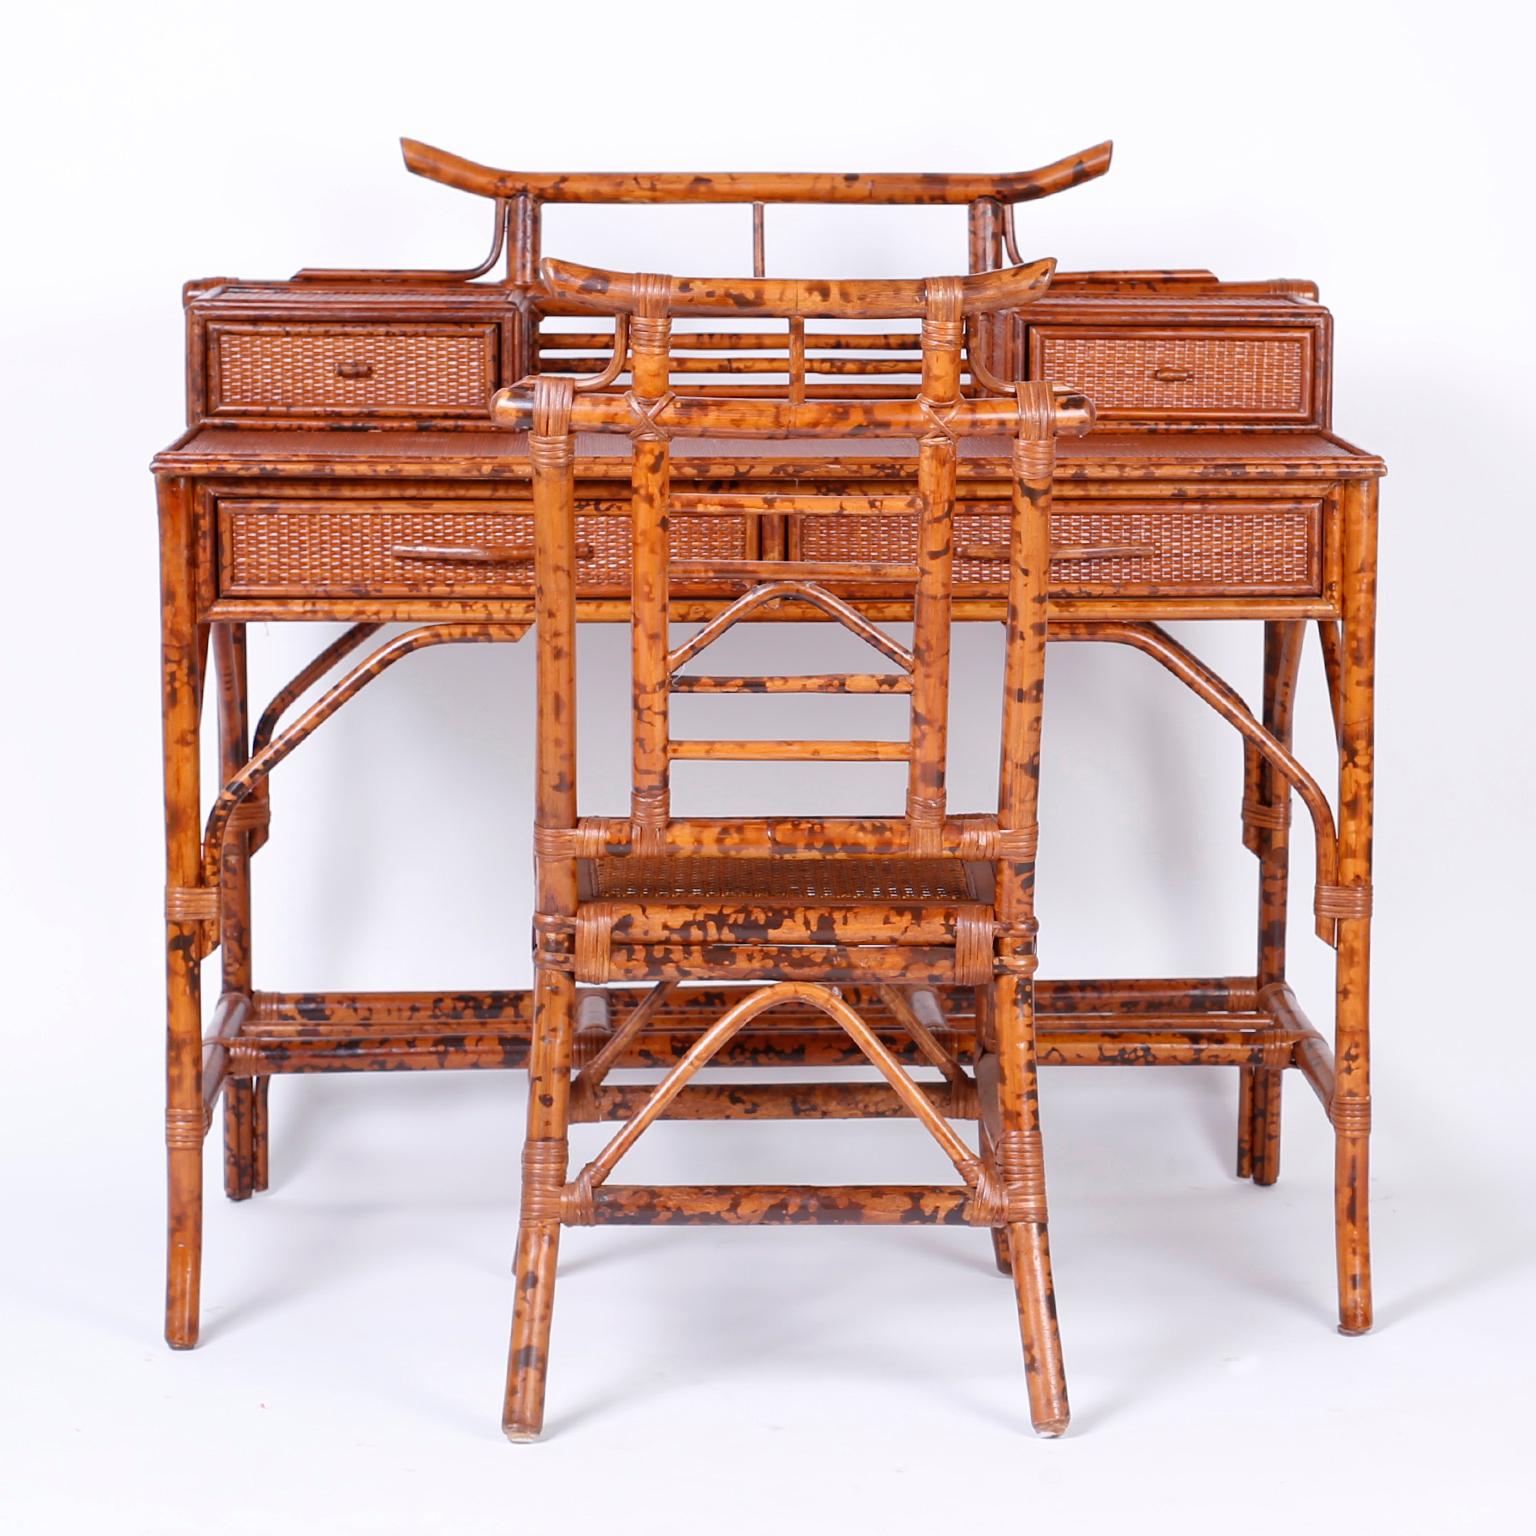 Midcentury faux bamboo and grasscloth desk and matching caned seat chair, all in a tortoiseshell finish. Featuring a pagoda shaped gallery with two glove boxes, two drawers in the case, and an alluring organic palette.

Chair measurements- H 37, W